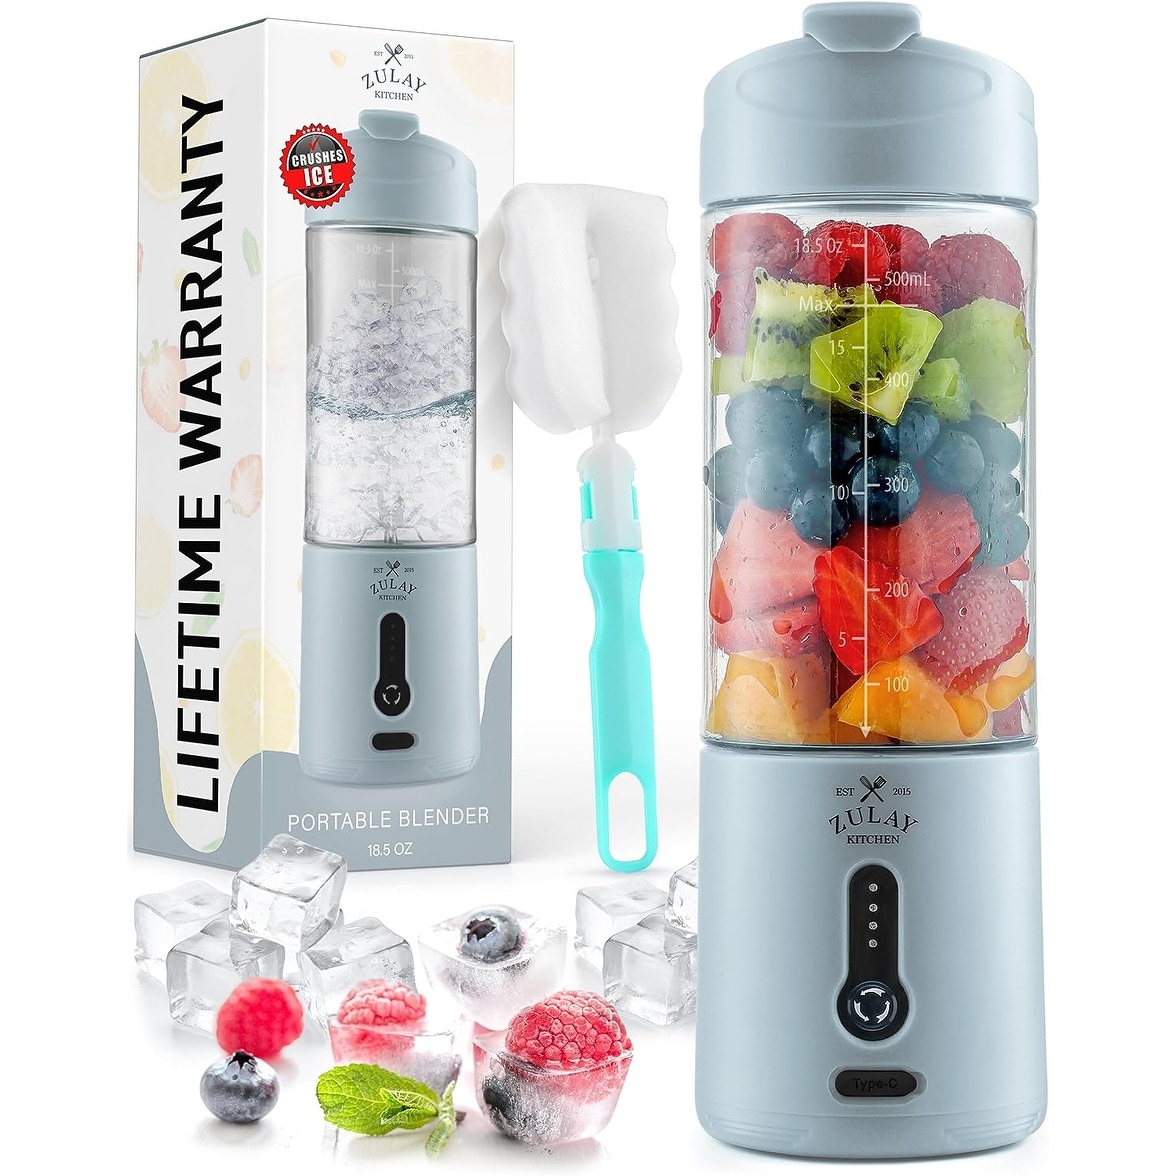 https://ak1.ostkcdn.com/images/products/is/images/direct/a0995234d851426a2e9e62bea8ce83641a862915/Zulay-Kitchen-18oz-Personal-Blenders-that-Crush-Ice.jpg